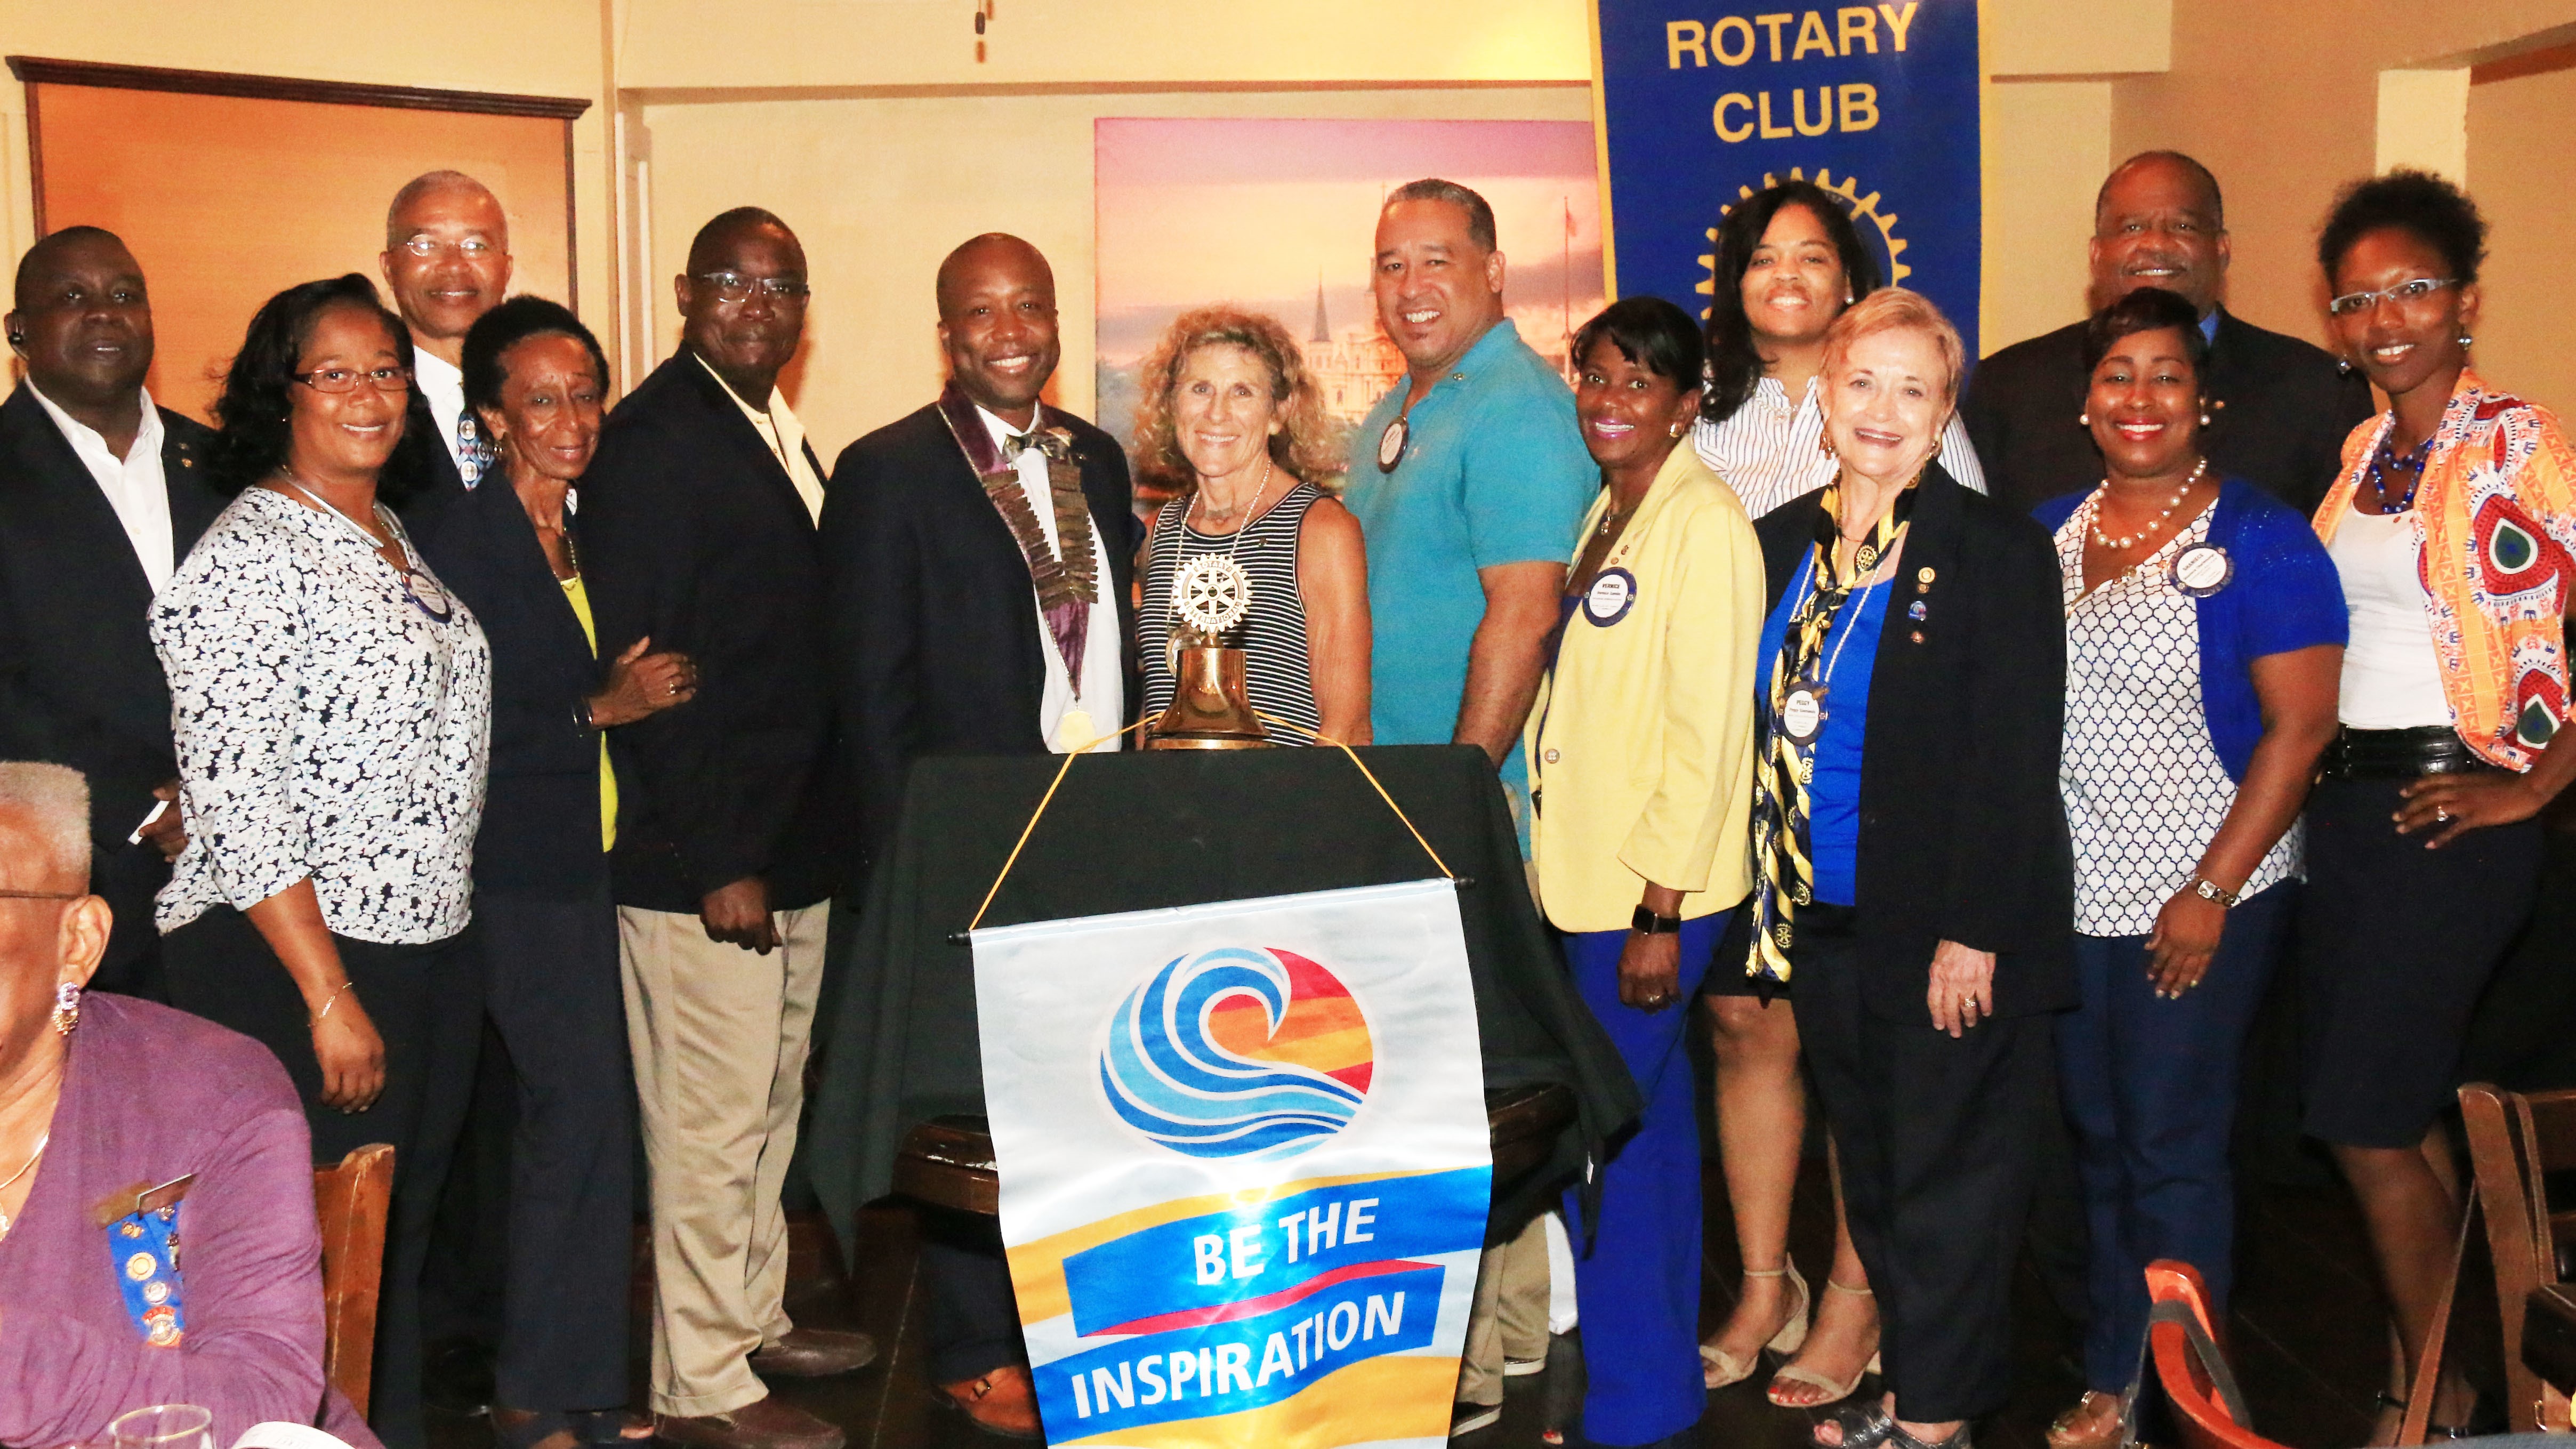 A Brief History of The Rotary Club of St. Thomas II